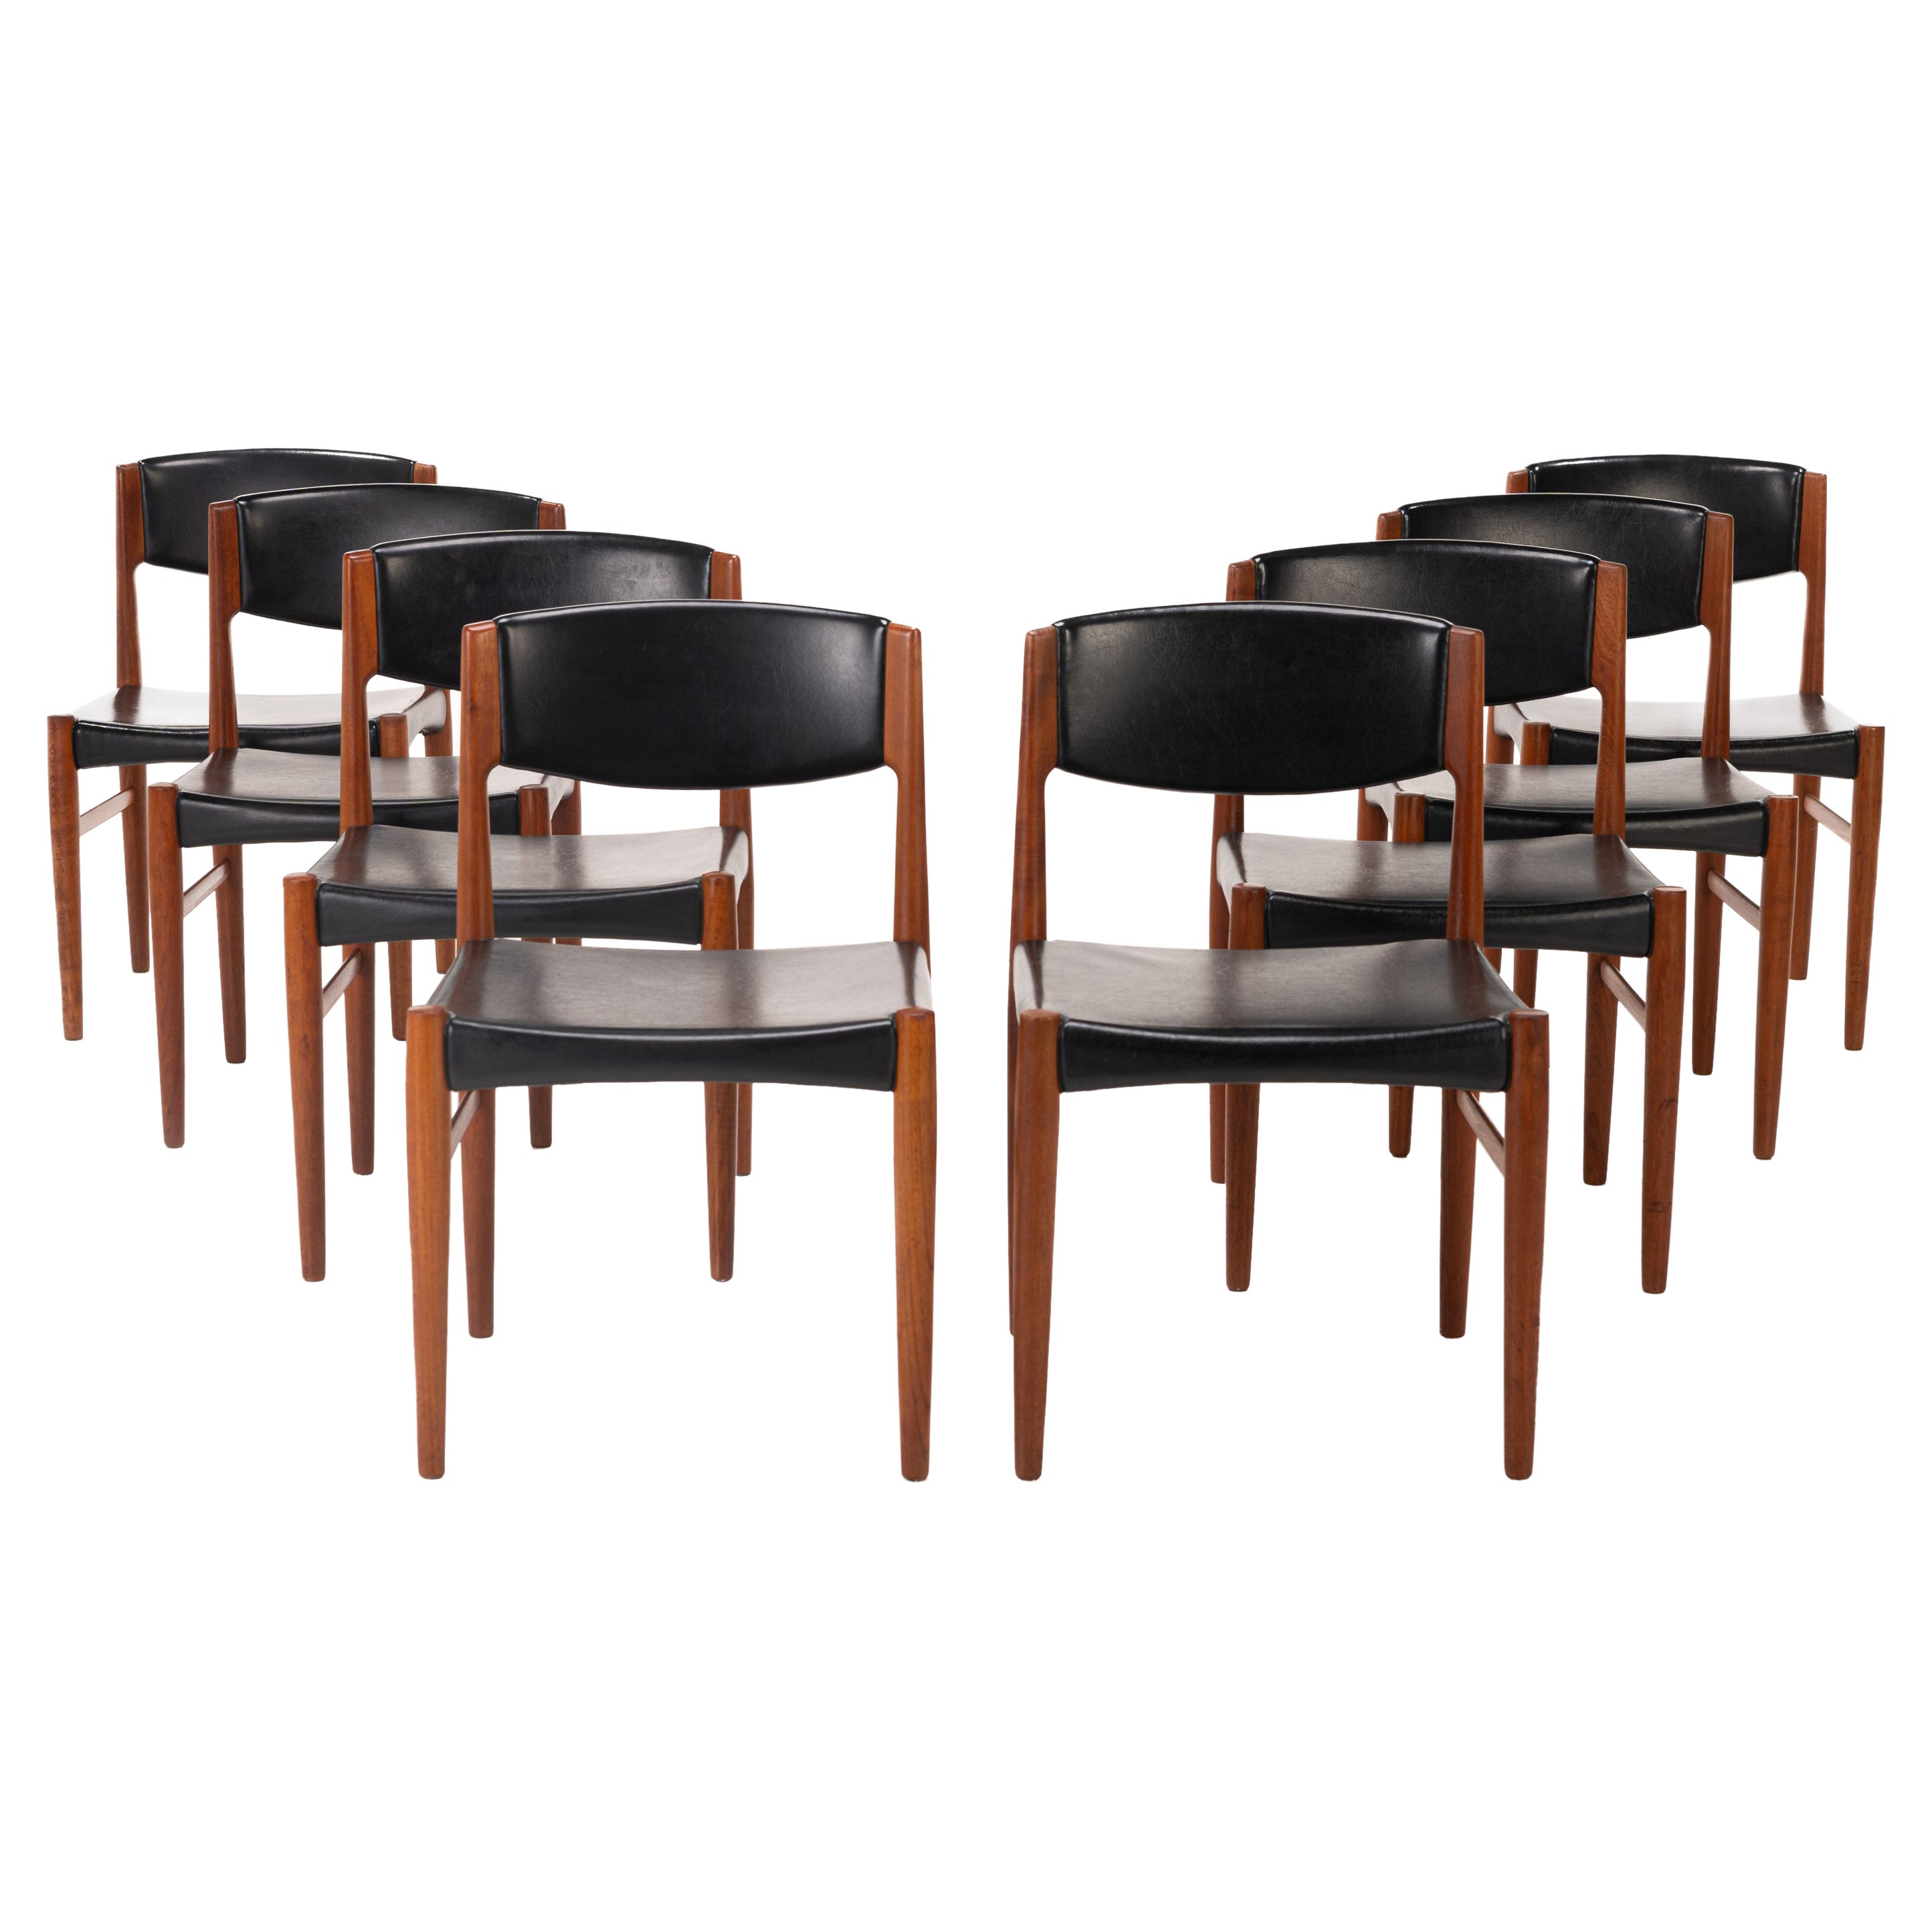 Set of 8 Dining Chairs by Grete Jalk for Glostrup Møbelfabrik, Denmark, 1960s